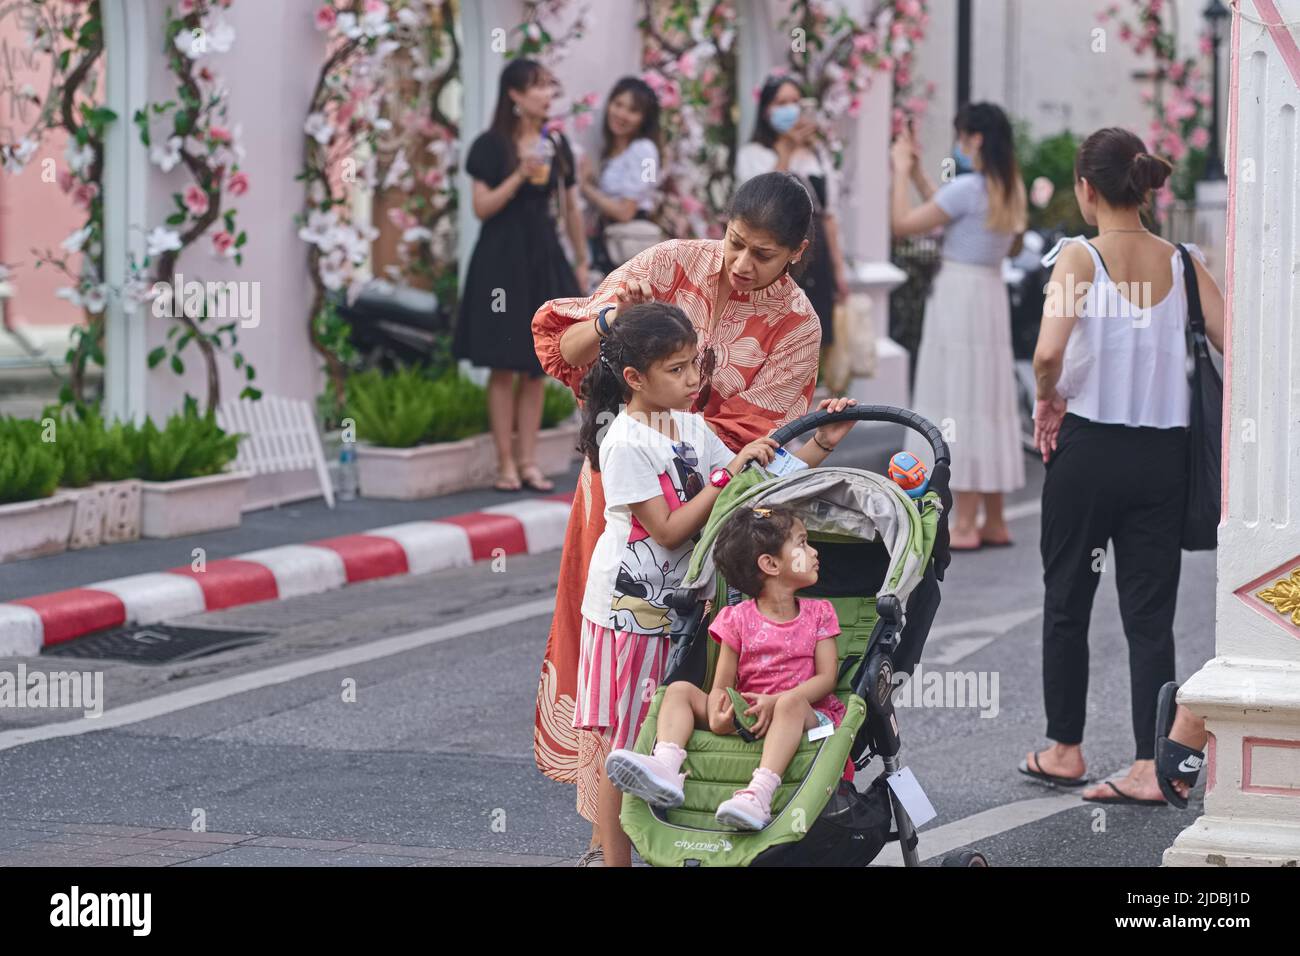 A Indian mother with her children on holiday in Thailand, visiting picturesque Soi Rommanee in the Old Town area of Phuket Town, Thailand Stock Photo